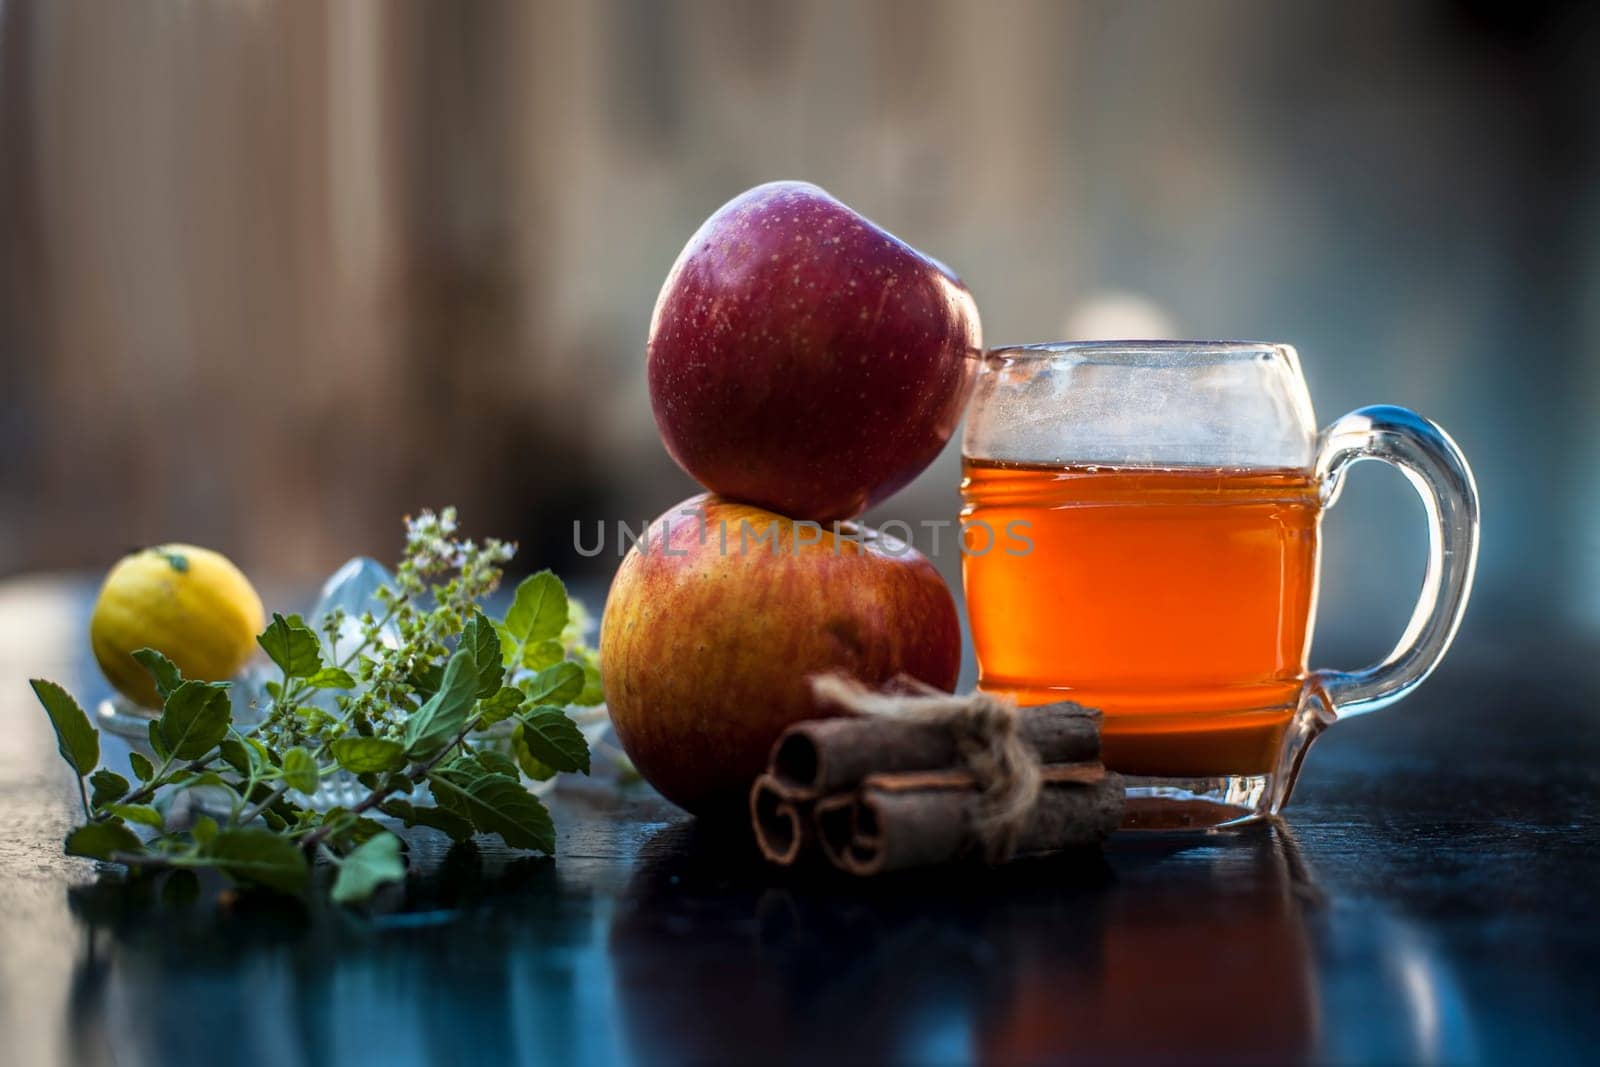 Close-up of herbal and organic juice of apple with orange juice, cinnamon sticks, lemon juice, ginger or adrak, and some tulsi leaves or holy basil leaves in a transparent glass with all raw ingredients. by mirzamlk